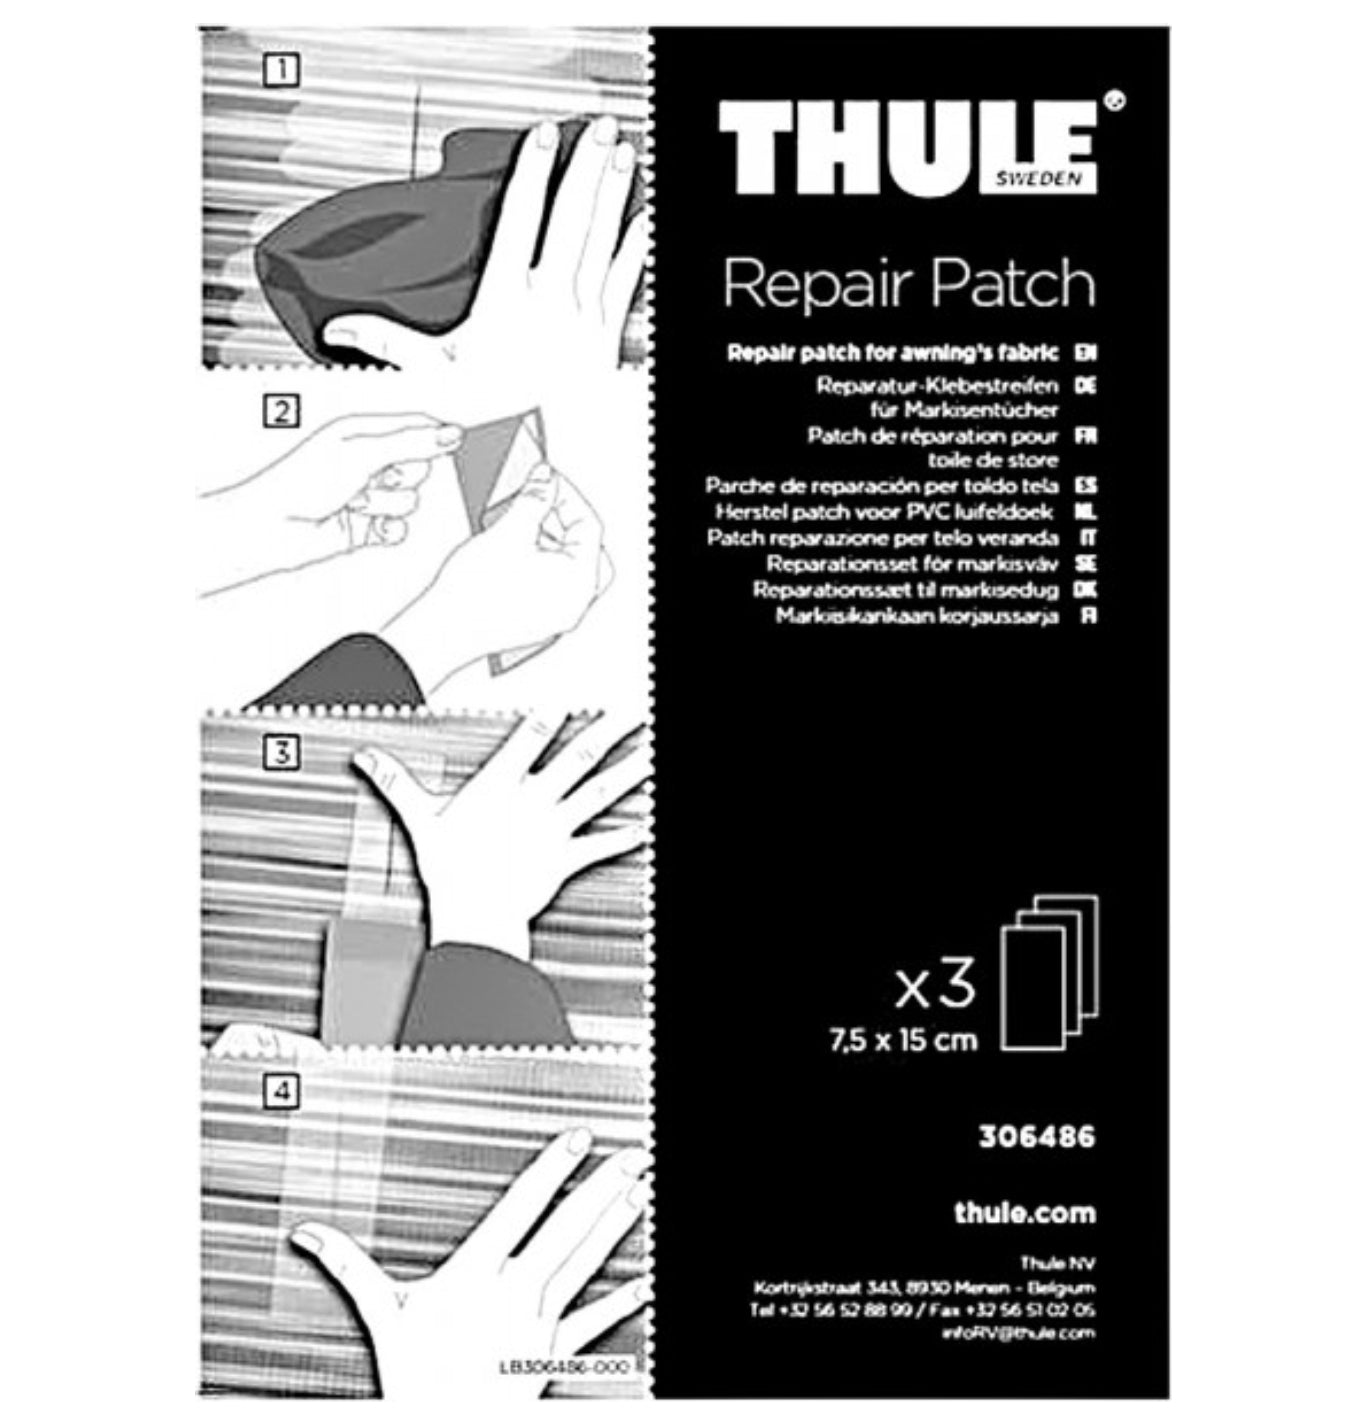 Thule Omnistor Awning Repair Patch Kit | 306486 Image